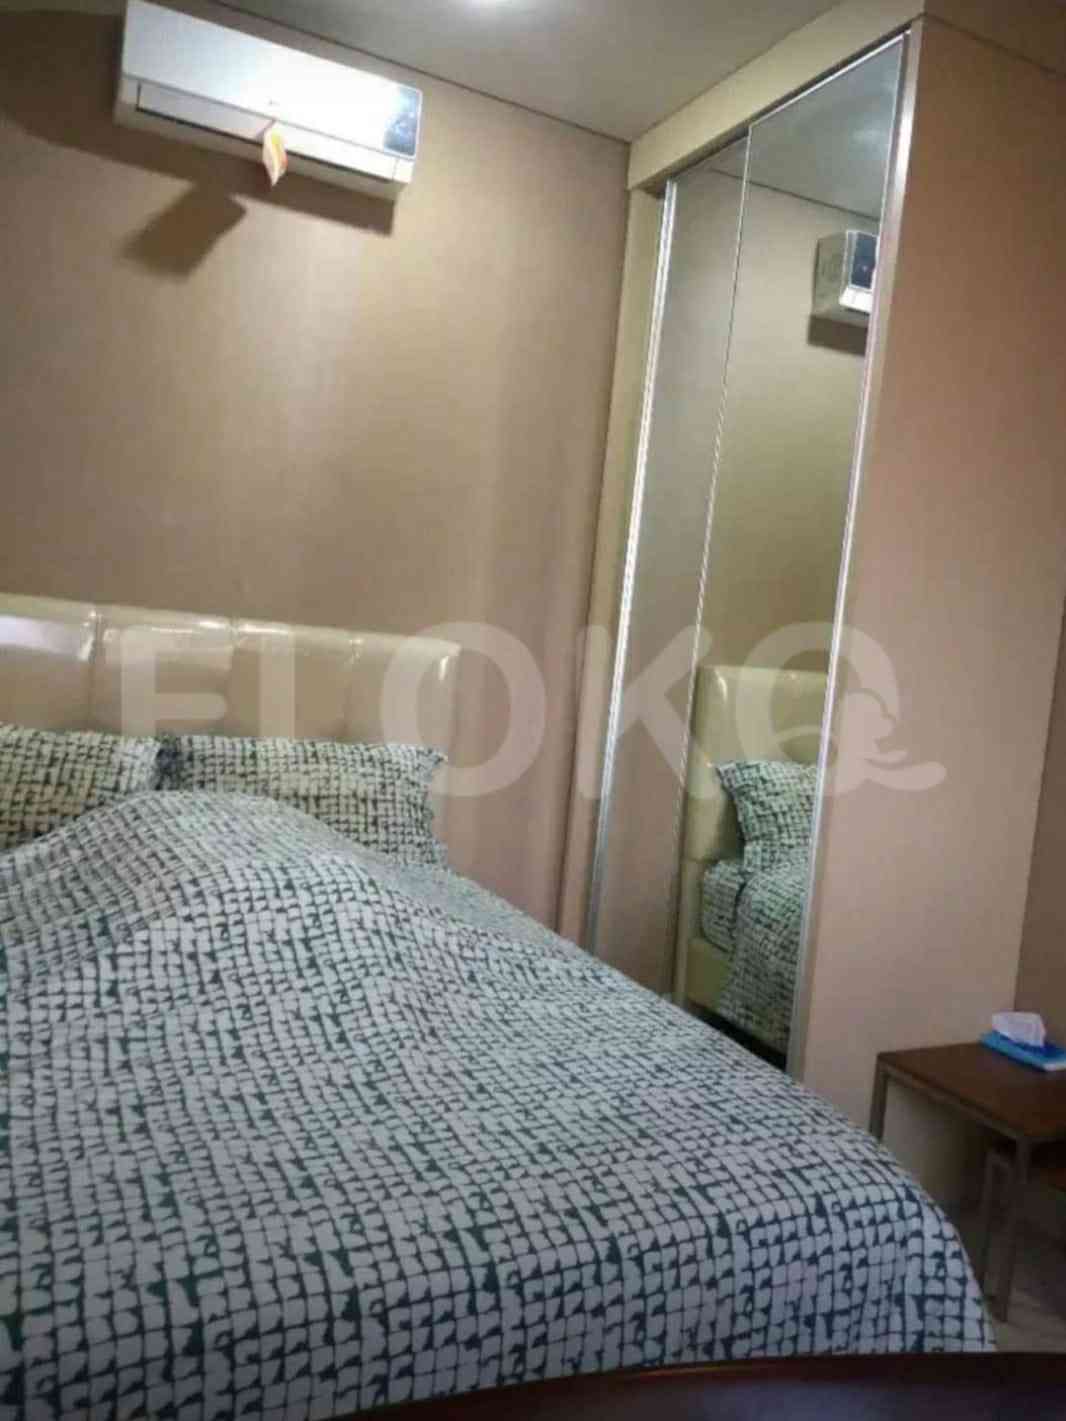 2 Bedroom on nullth Floor for Rent in Kuningan Place Apartment - fku453 4